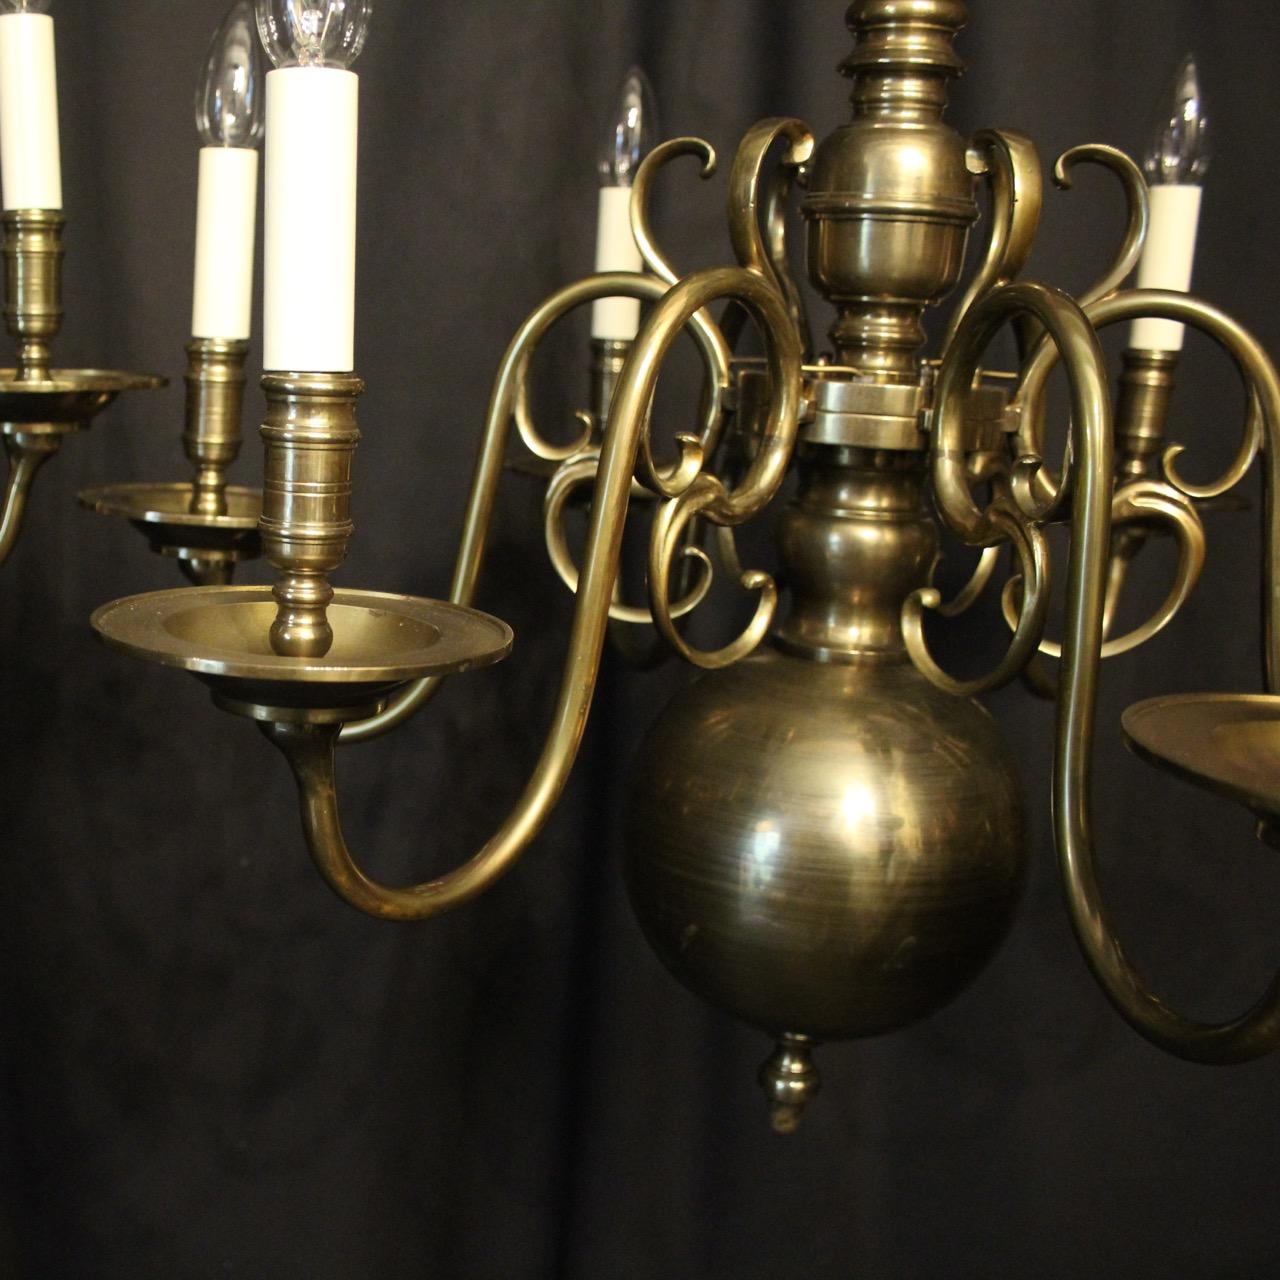 An English pair of bronze 6-light antique chandeliers, the scrolling arms with large stepped circular bobeche drip pans and reeded candle sconces, issuing from a knopped central column with ring finial, having the original chain and ceiling rose,